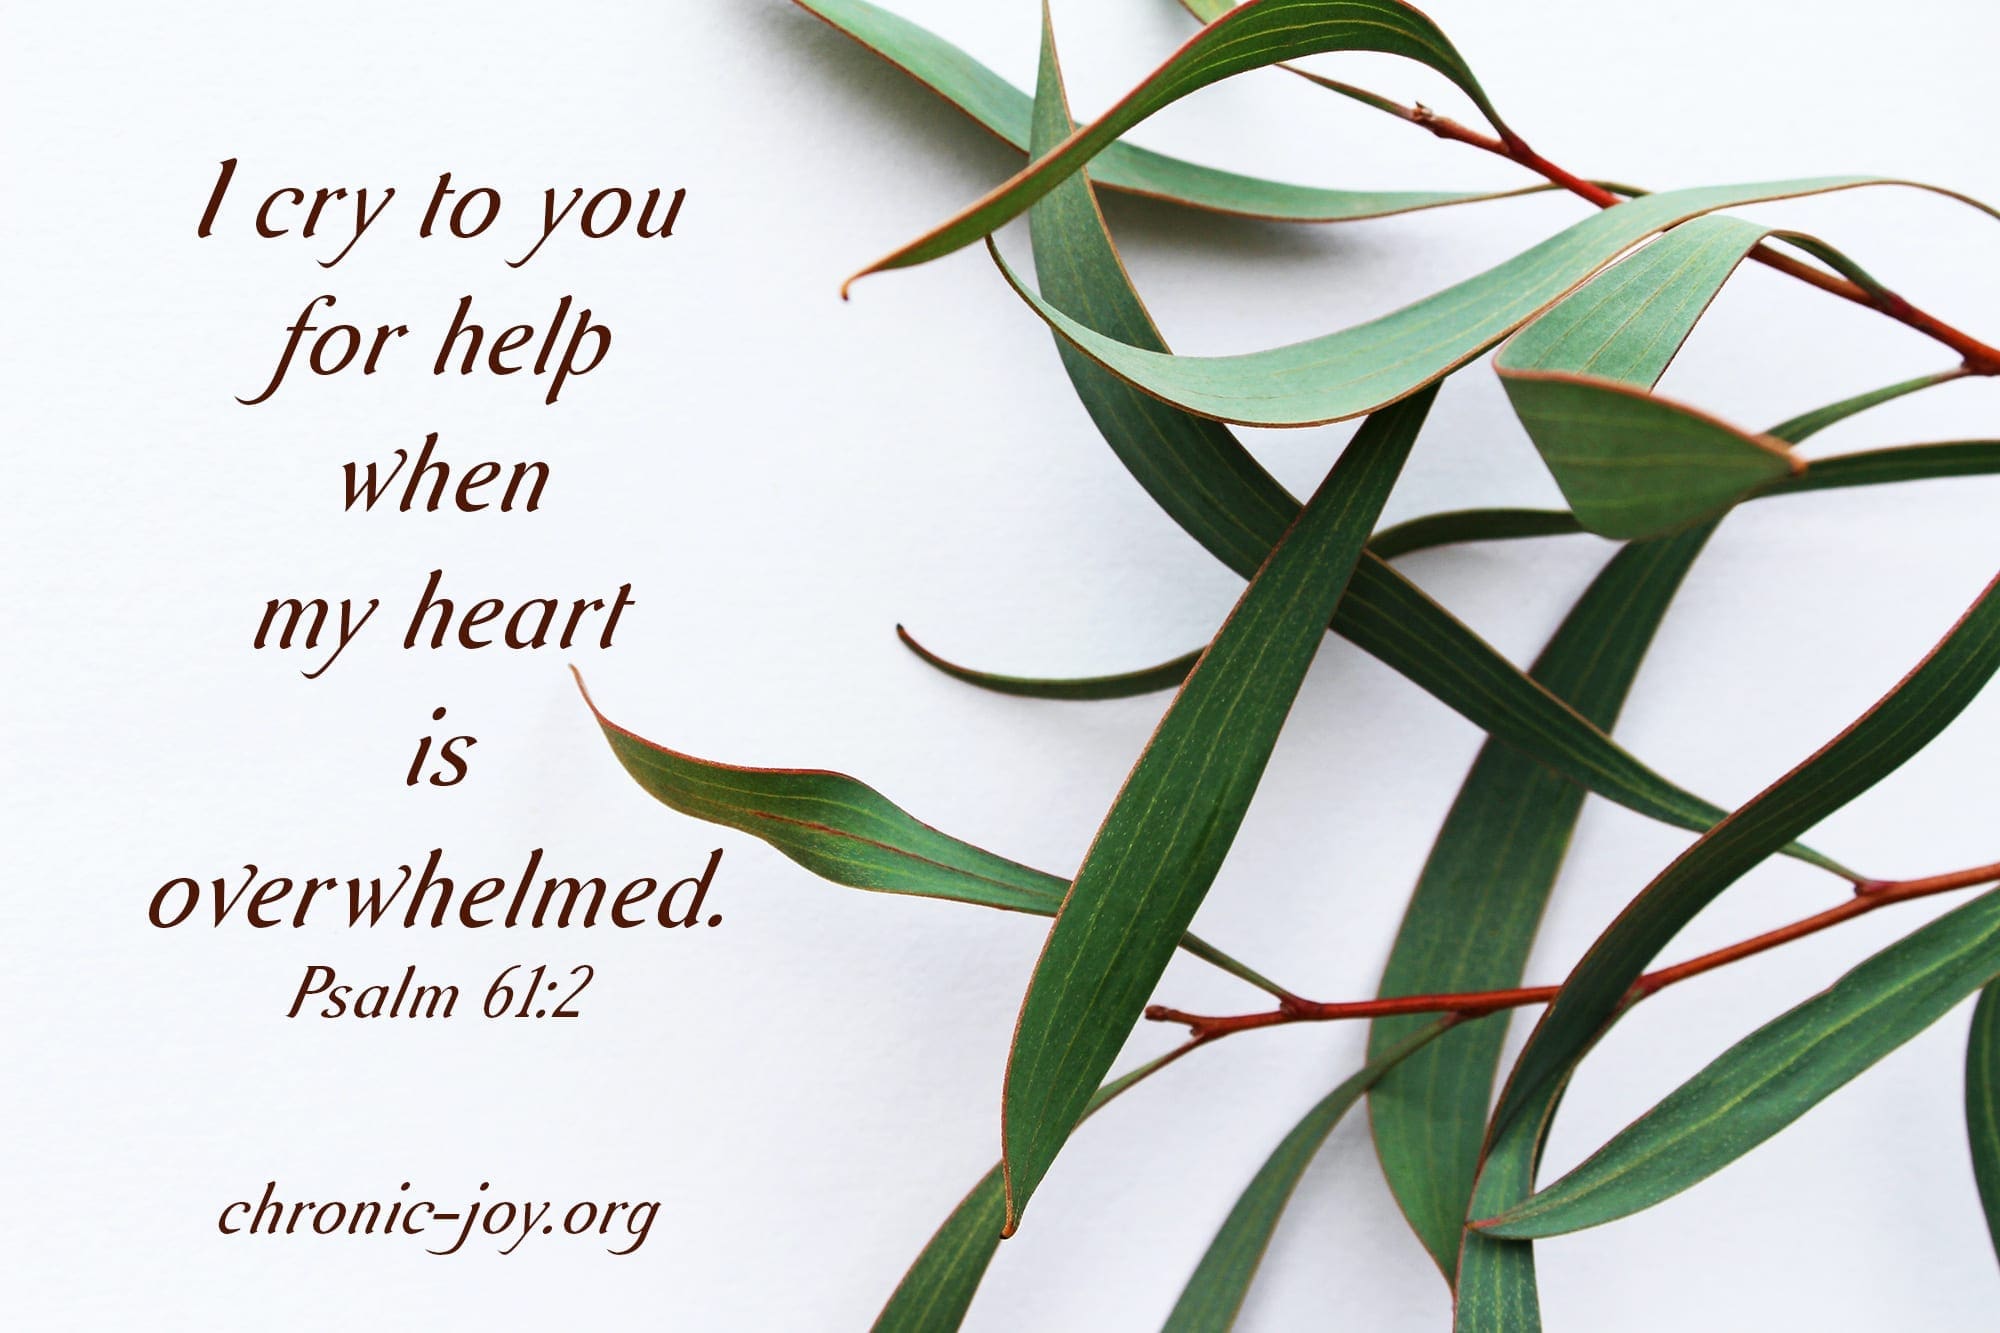 "I cry to you for help when my heart is overwhelmed." Psalm 61:2